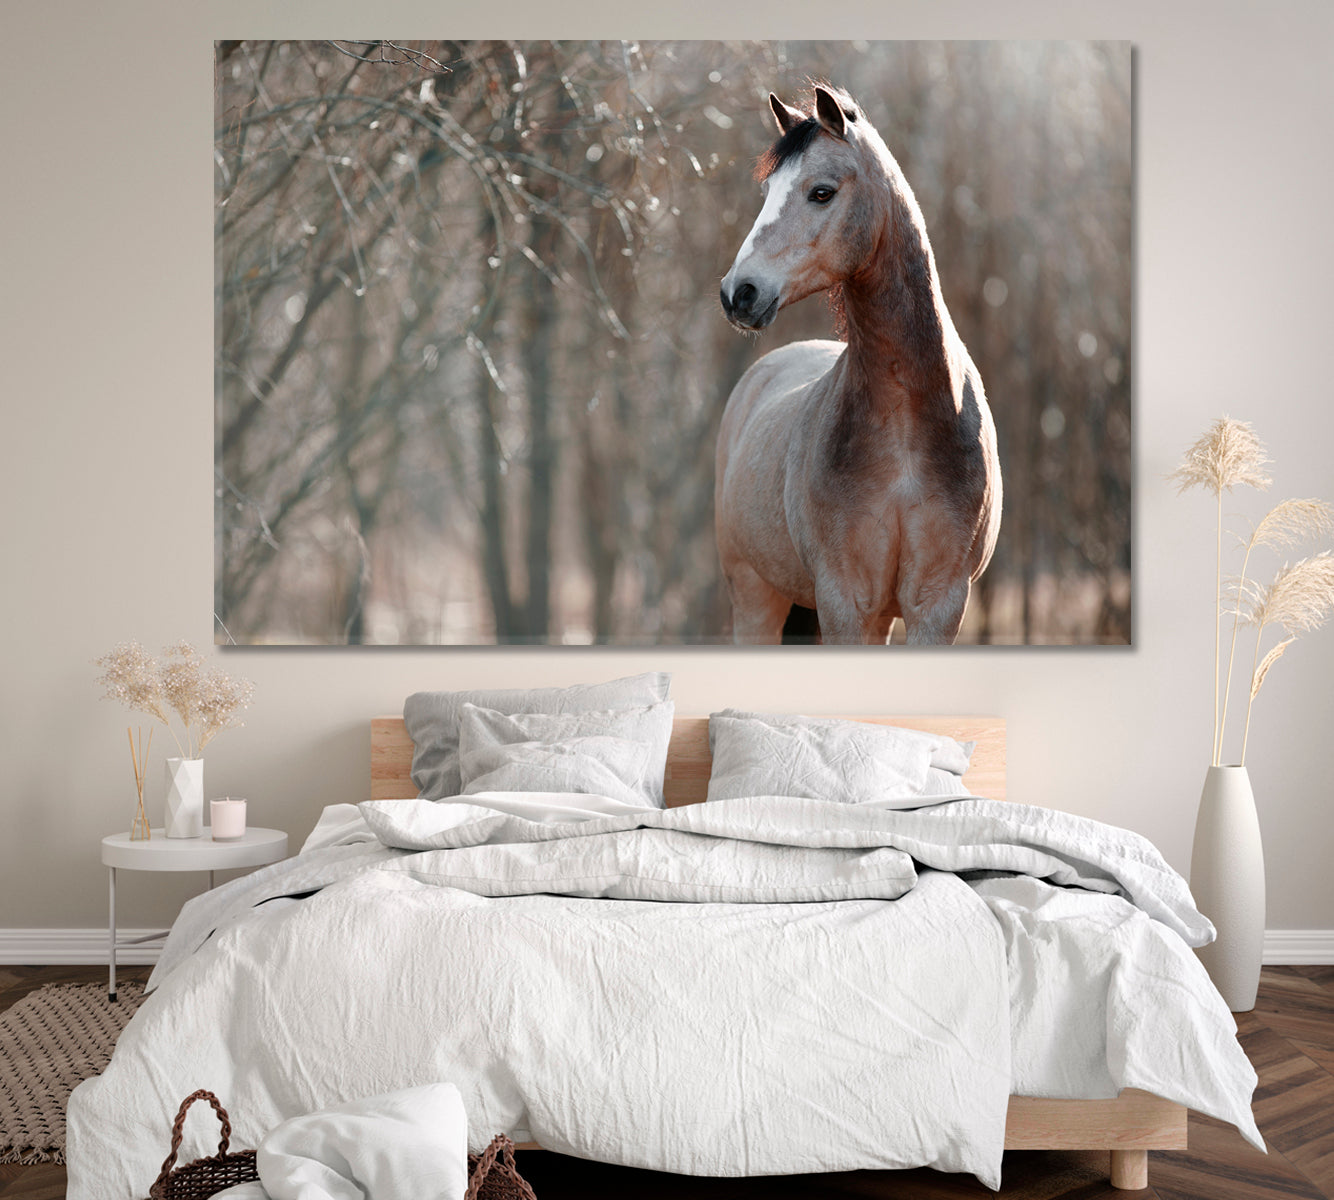 Welsh Pony Horse Canvas Print ArtLexy 1 Panel 24"x16" inches 